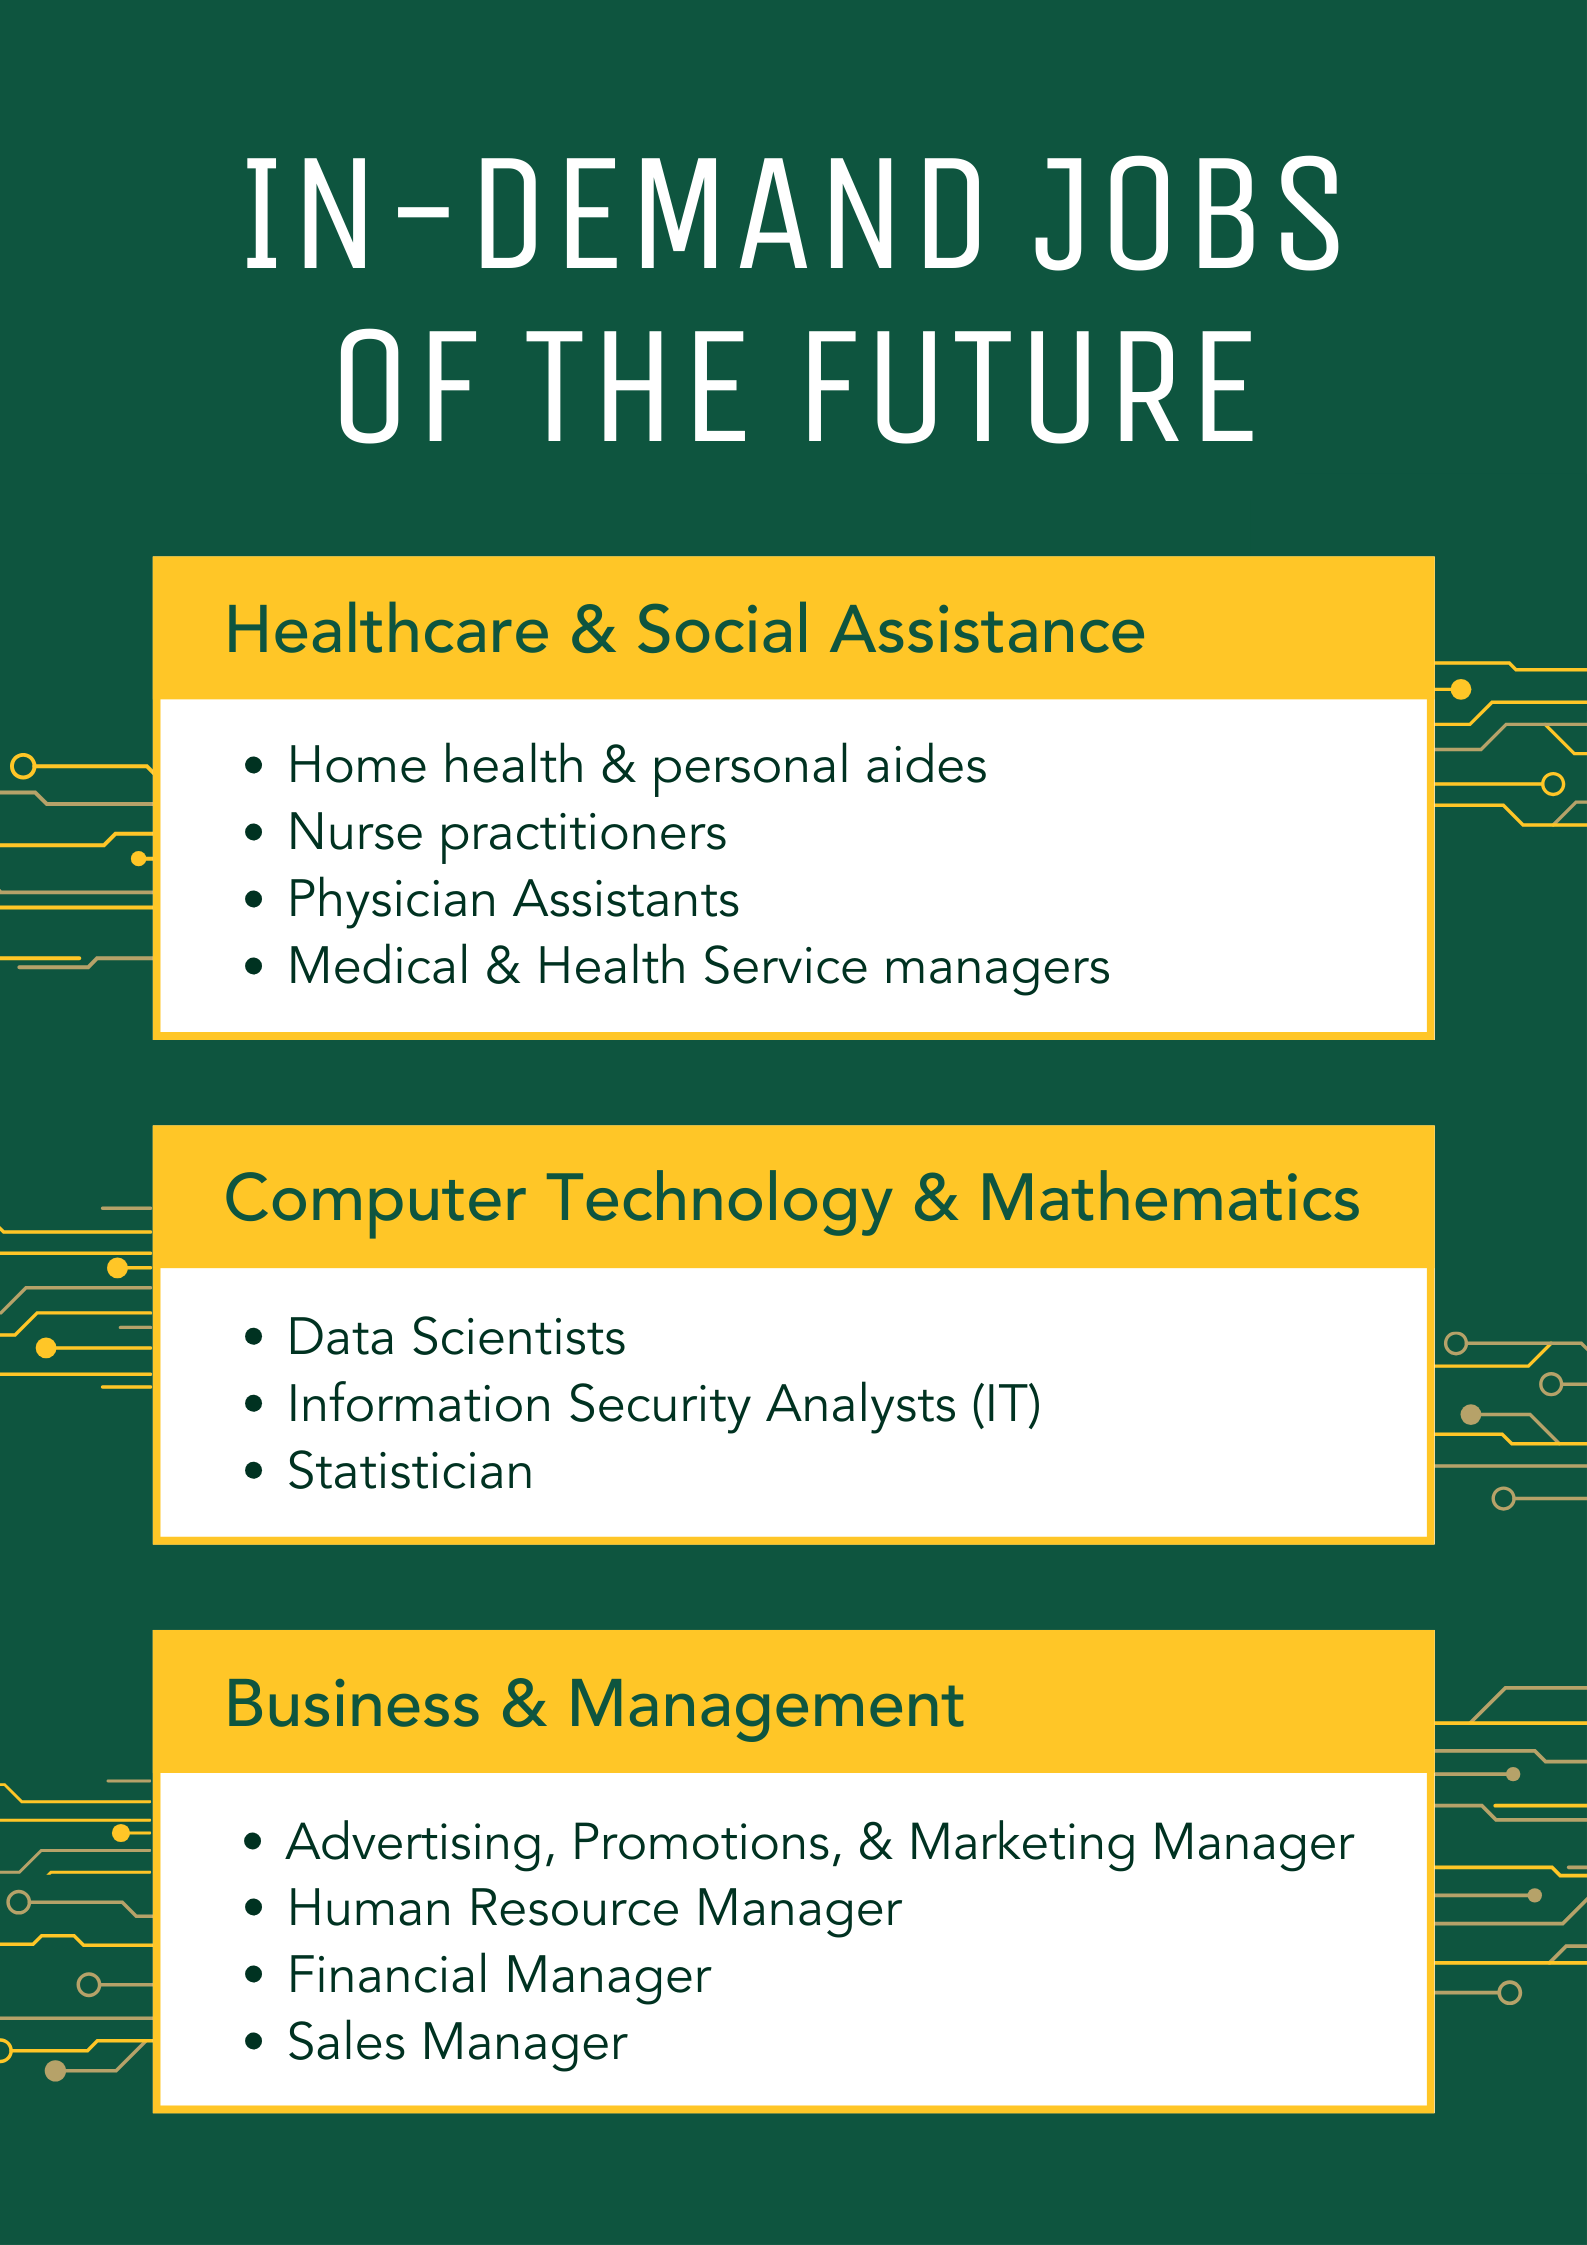 In-demand Jobs of the future: healthcare & social assistance, computer technology & mathematics, business & management 